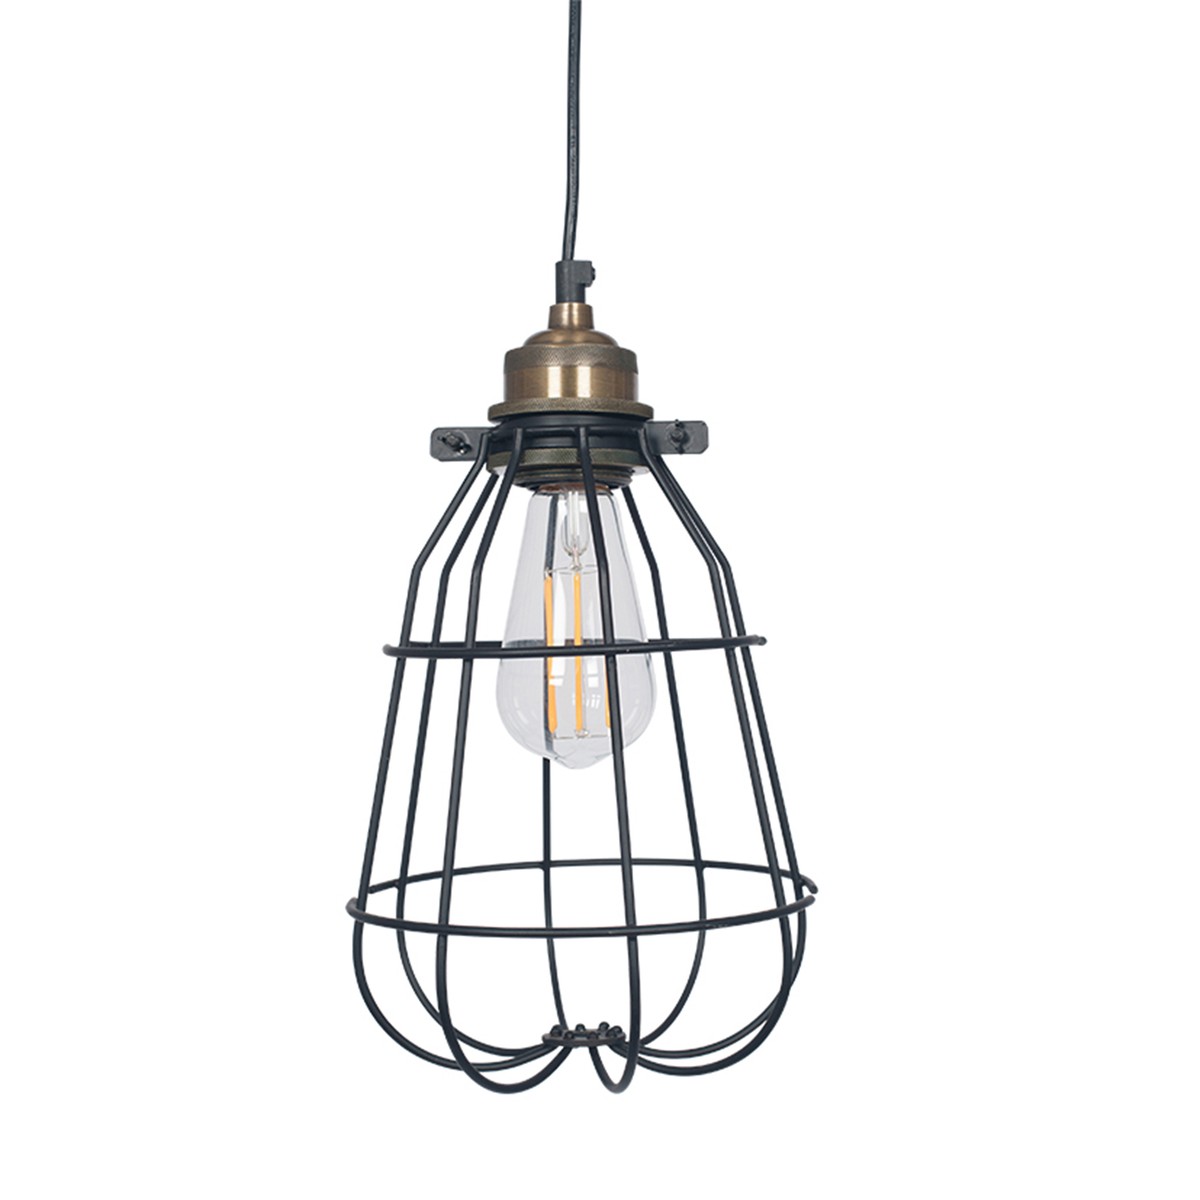 Introducing our new lighting range | La Redoute